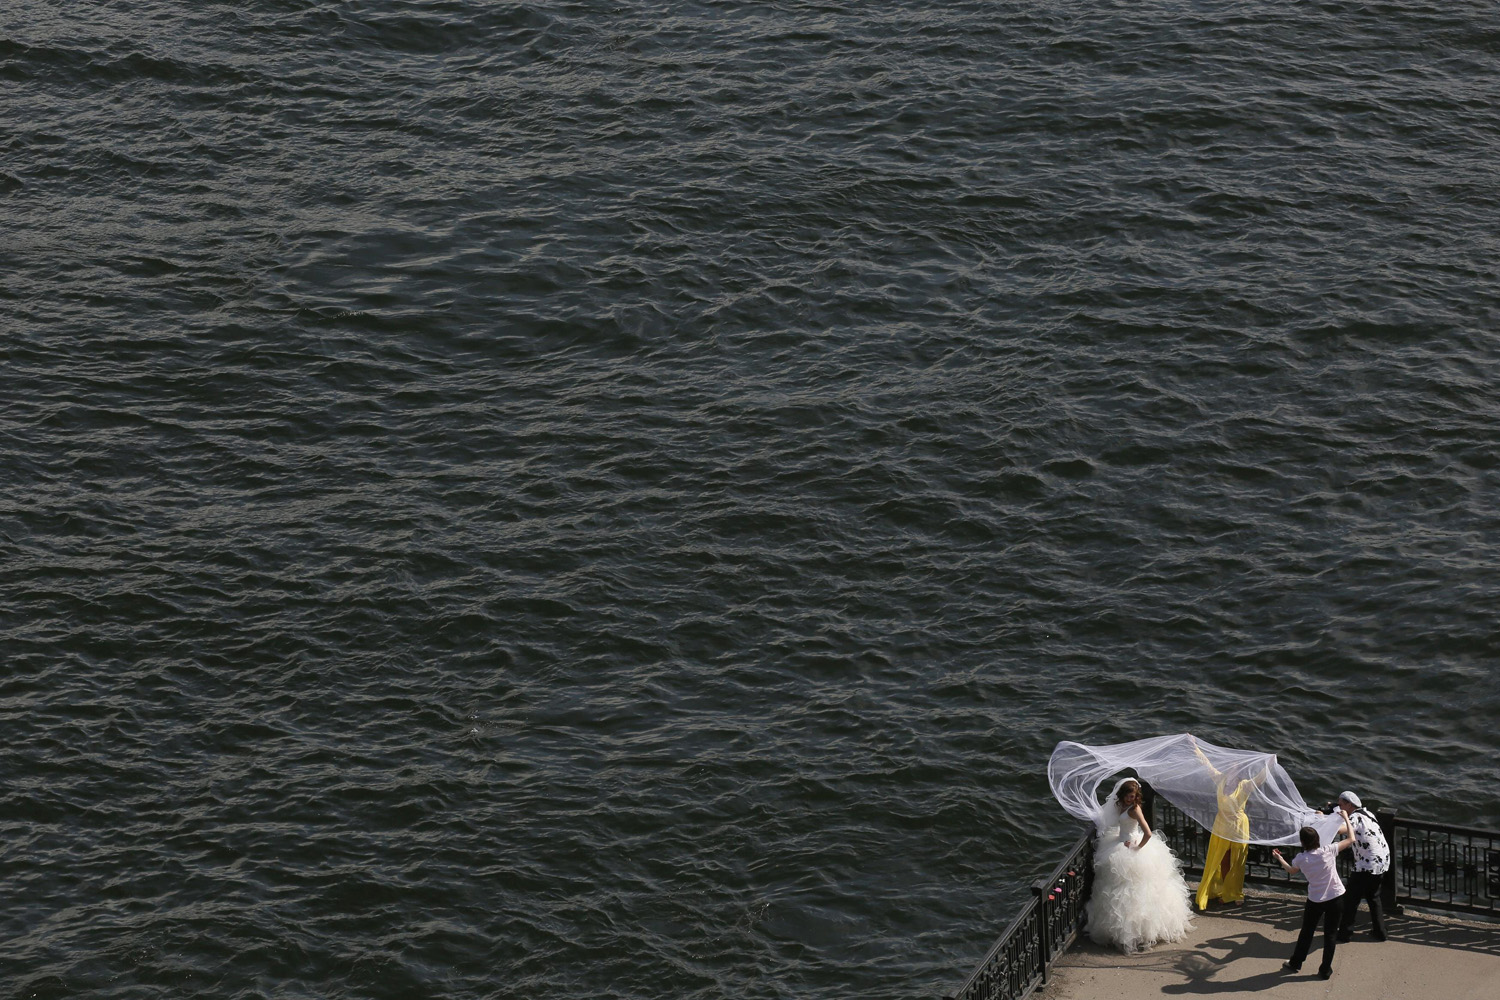 Bride poses for a photographer on an embankment at the Yenisei River in Russia's Siberian city of Krasnoyarsk